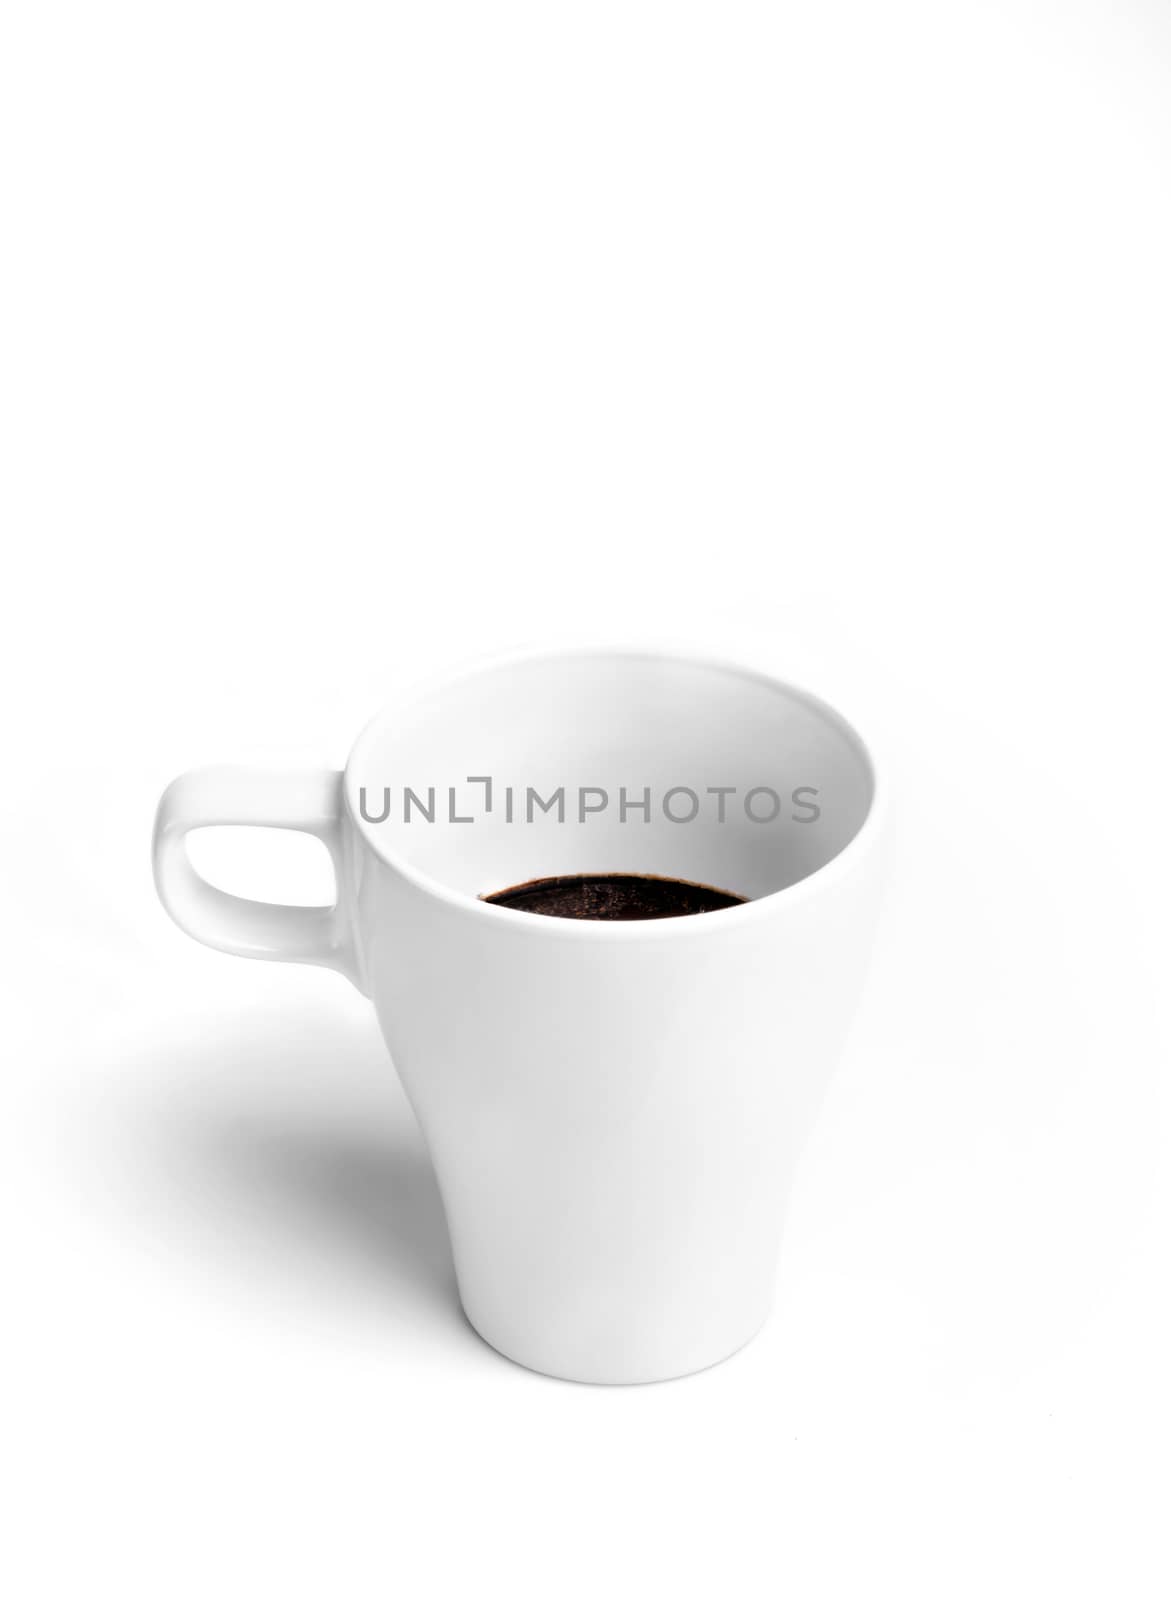 White porcelain half full cup of tasty morning coffee isolated on white background.